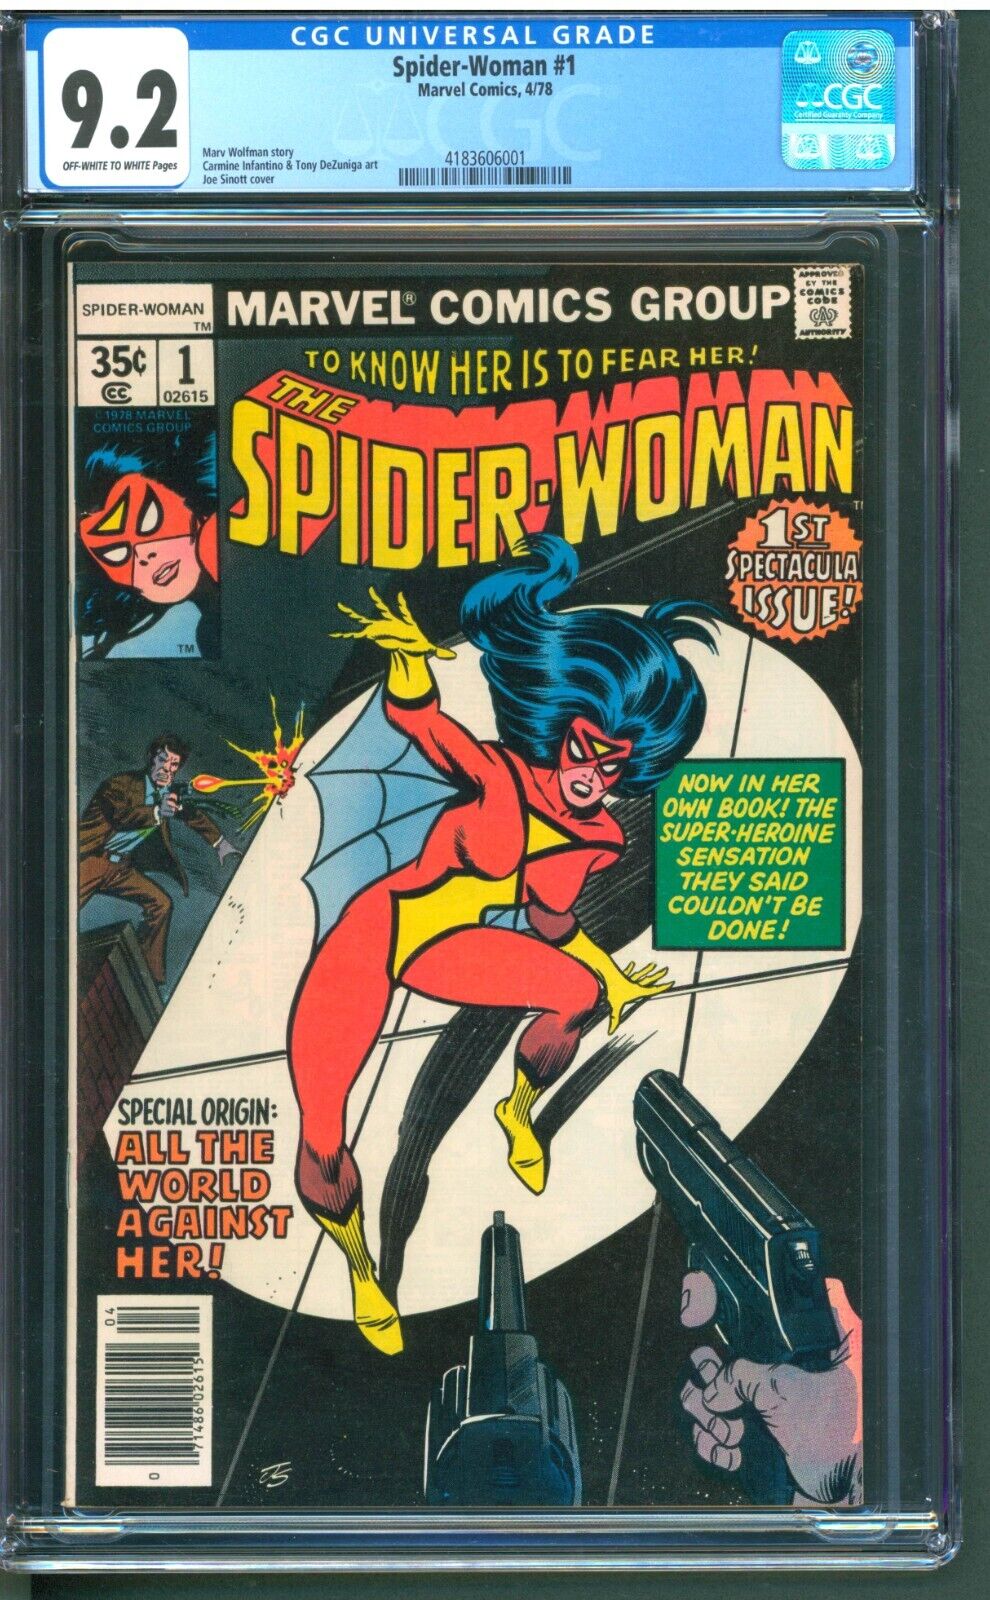 SPIDER-WOMAN #1   CGC 9.2 NM-  NICE OFF WHITE TO WHITE PAGES  KEY ISSUE